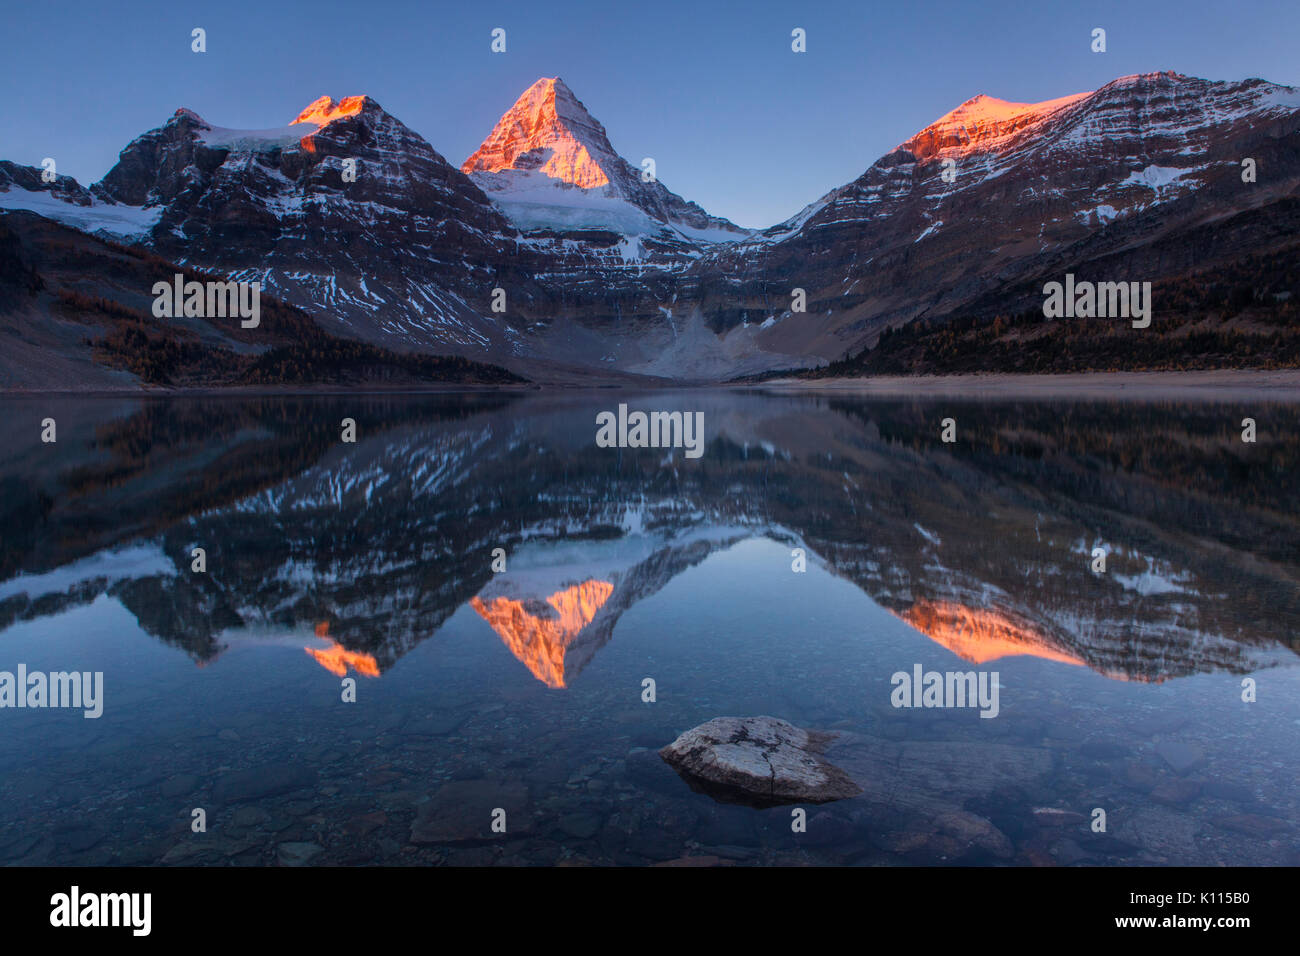 Early light on Mount Assiniboine reflected in Lake Magog in Mount Assiniboine Provincial Park, Rocky Mountains, British Columbia, Canada. Stock Photo